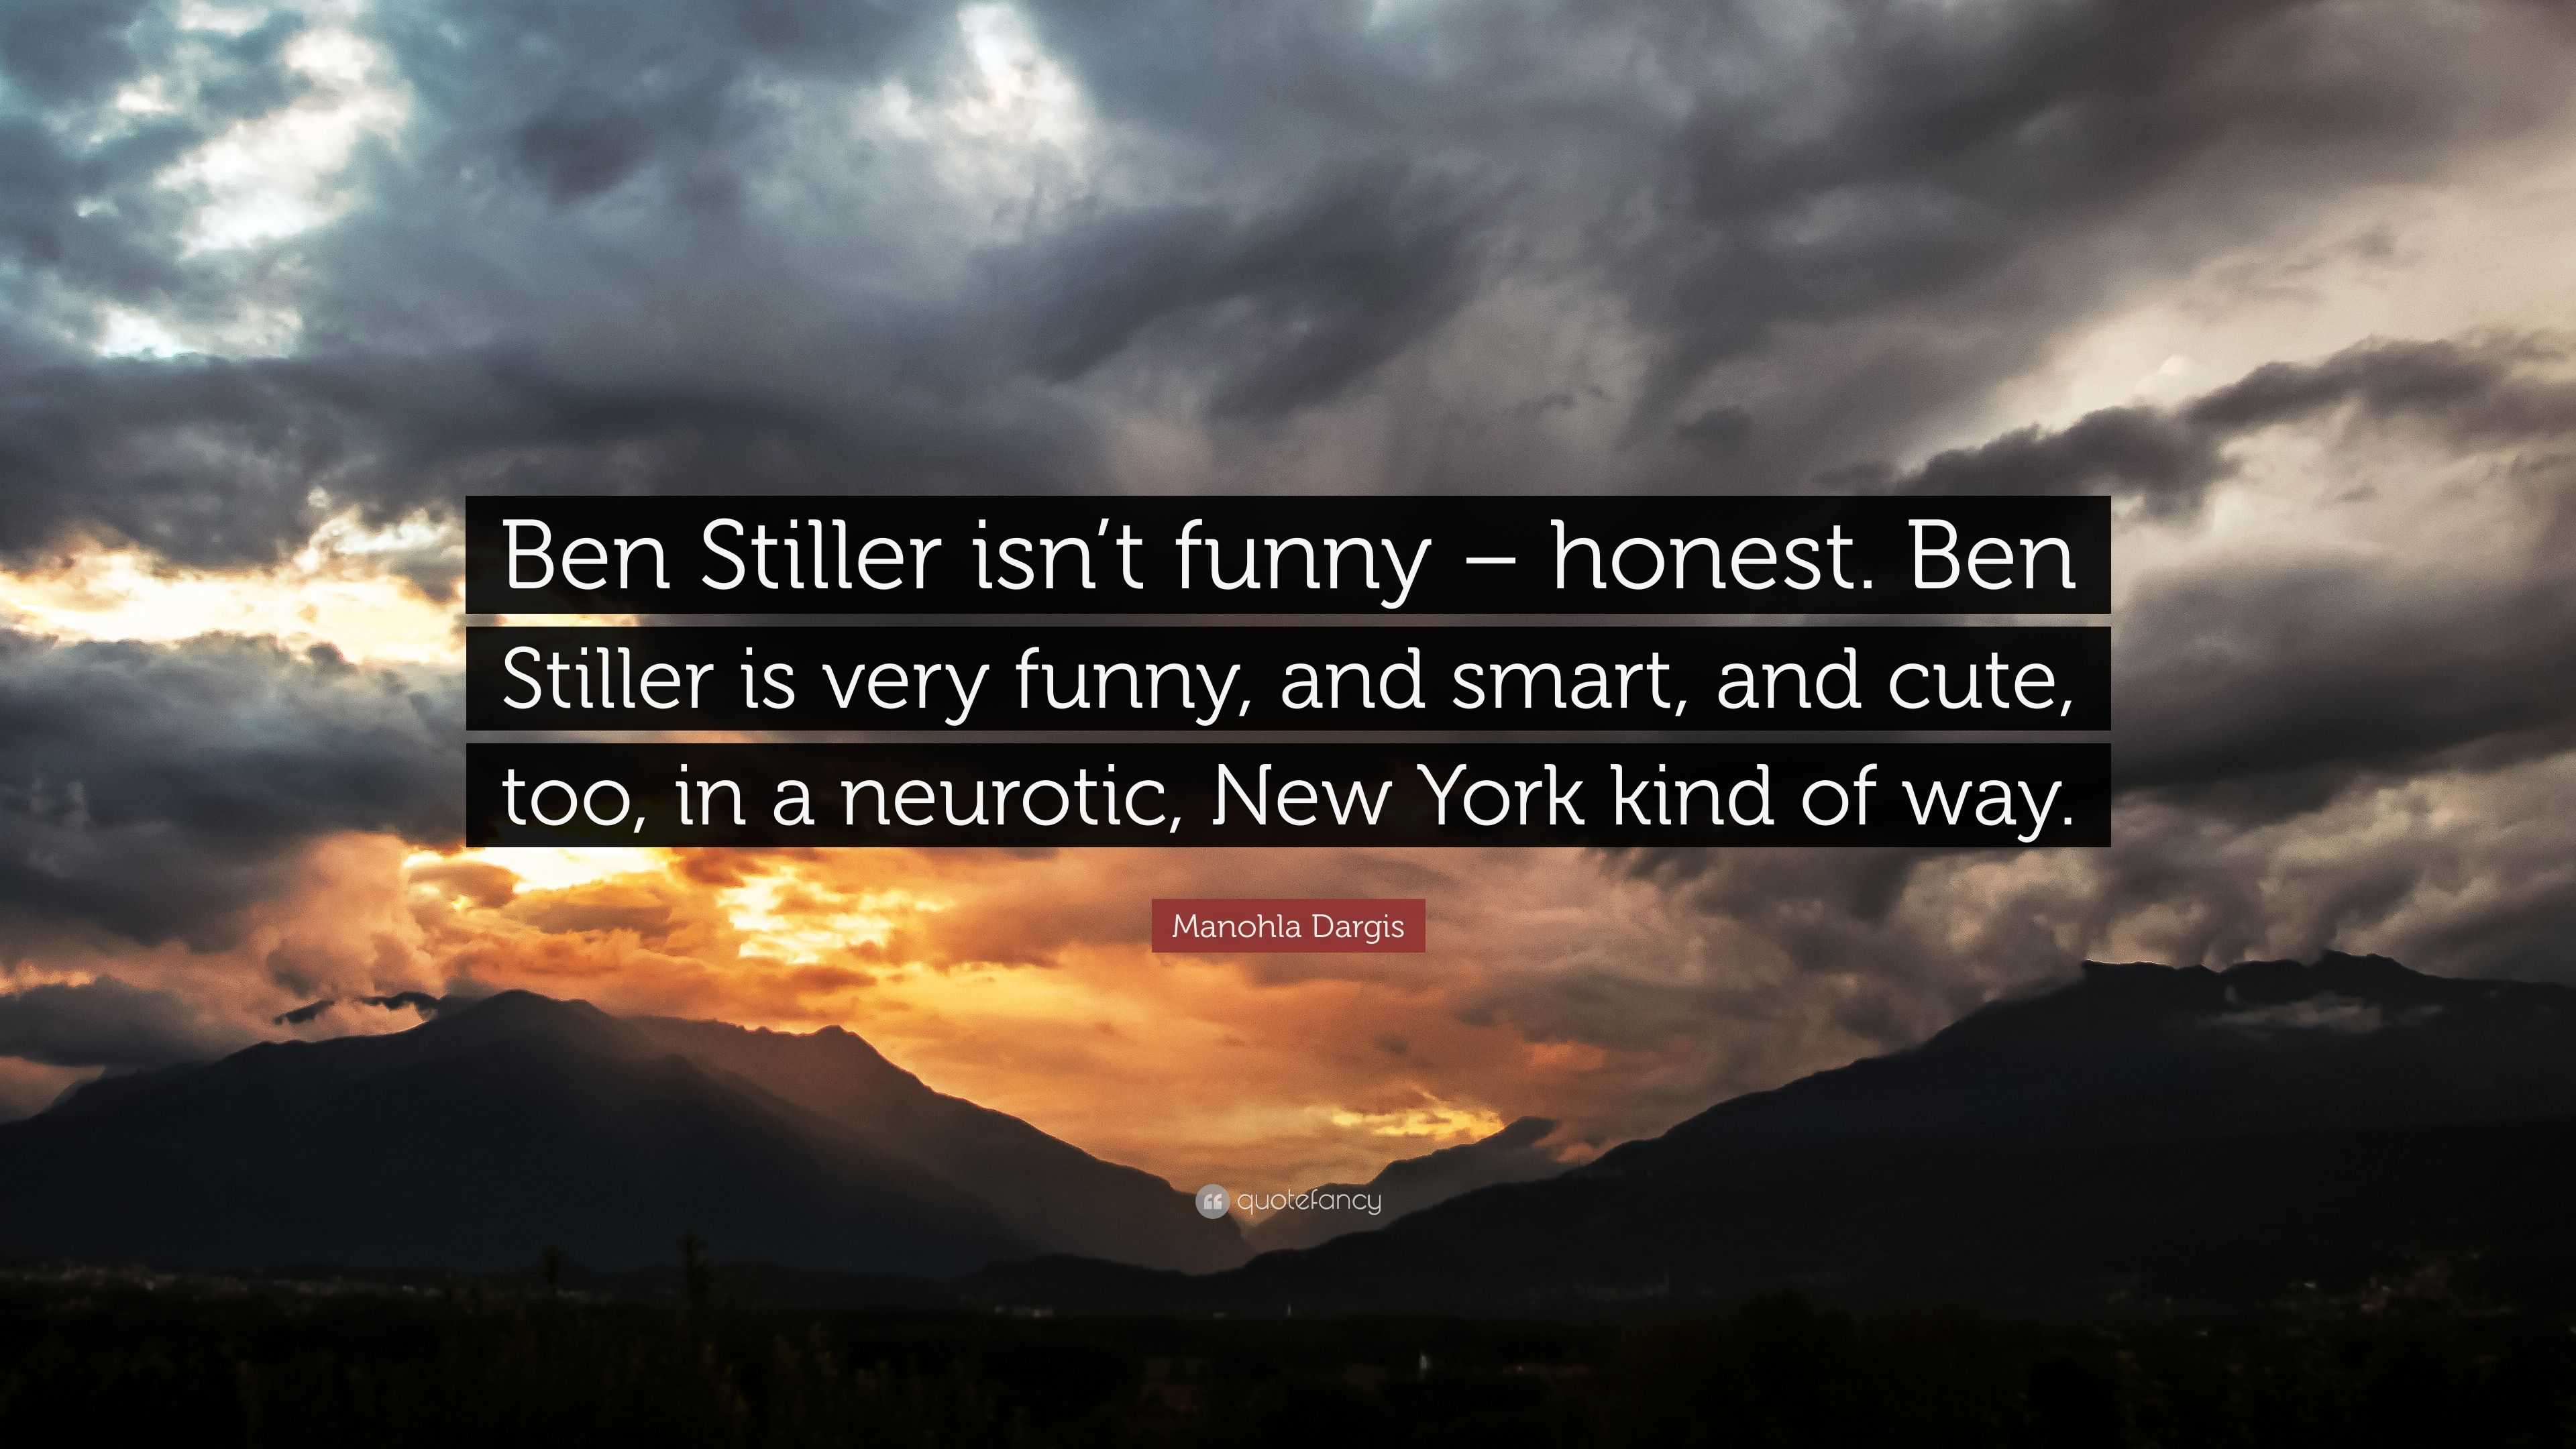 Manohla Dargis Quote: “Ben Stiller isn't funny – honest. Ben Stiller is very  funny, and smart, and cute, too, in a neurotic, New York kind of w...”